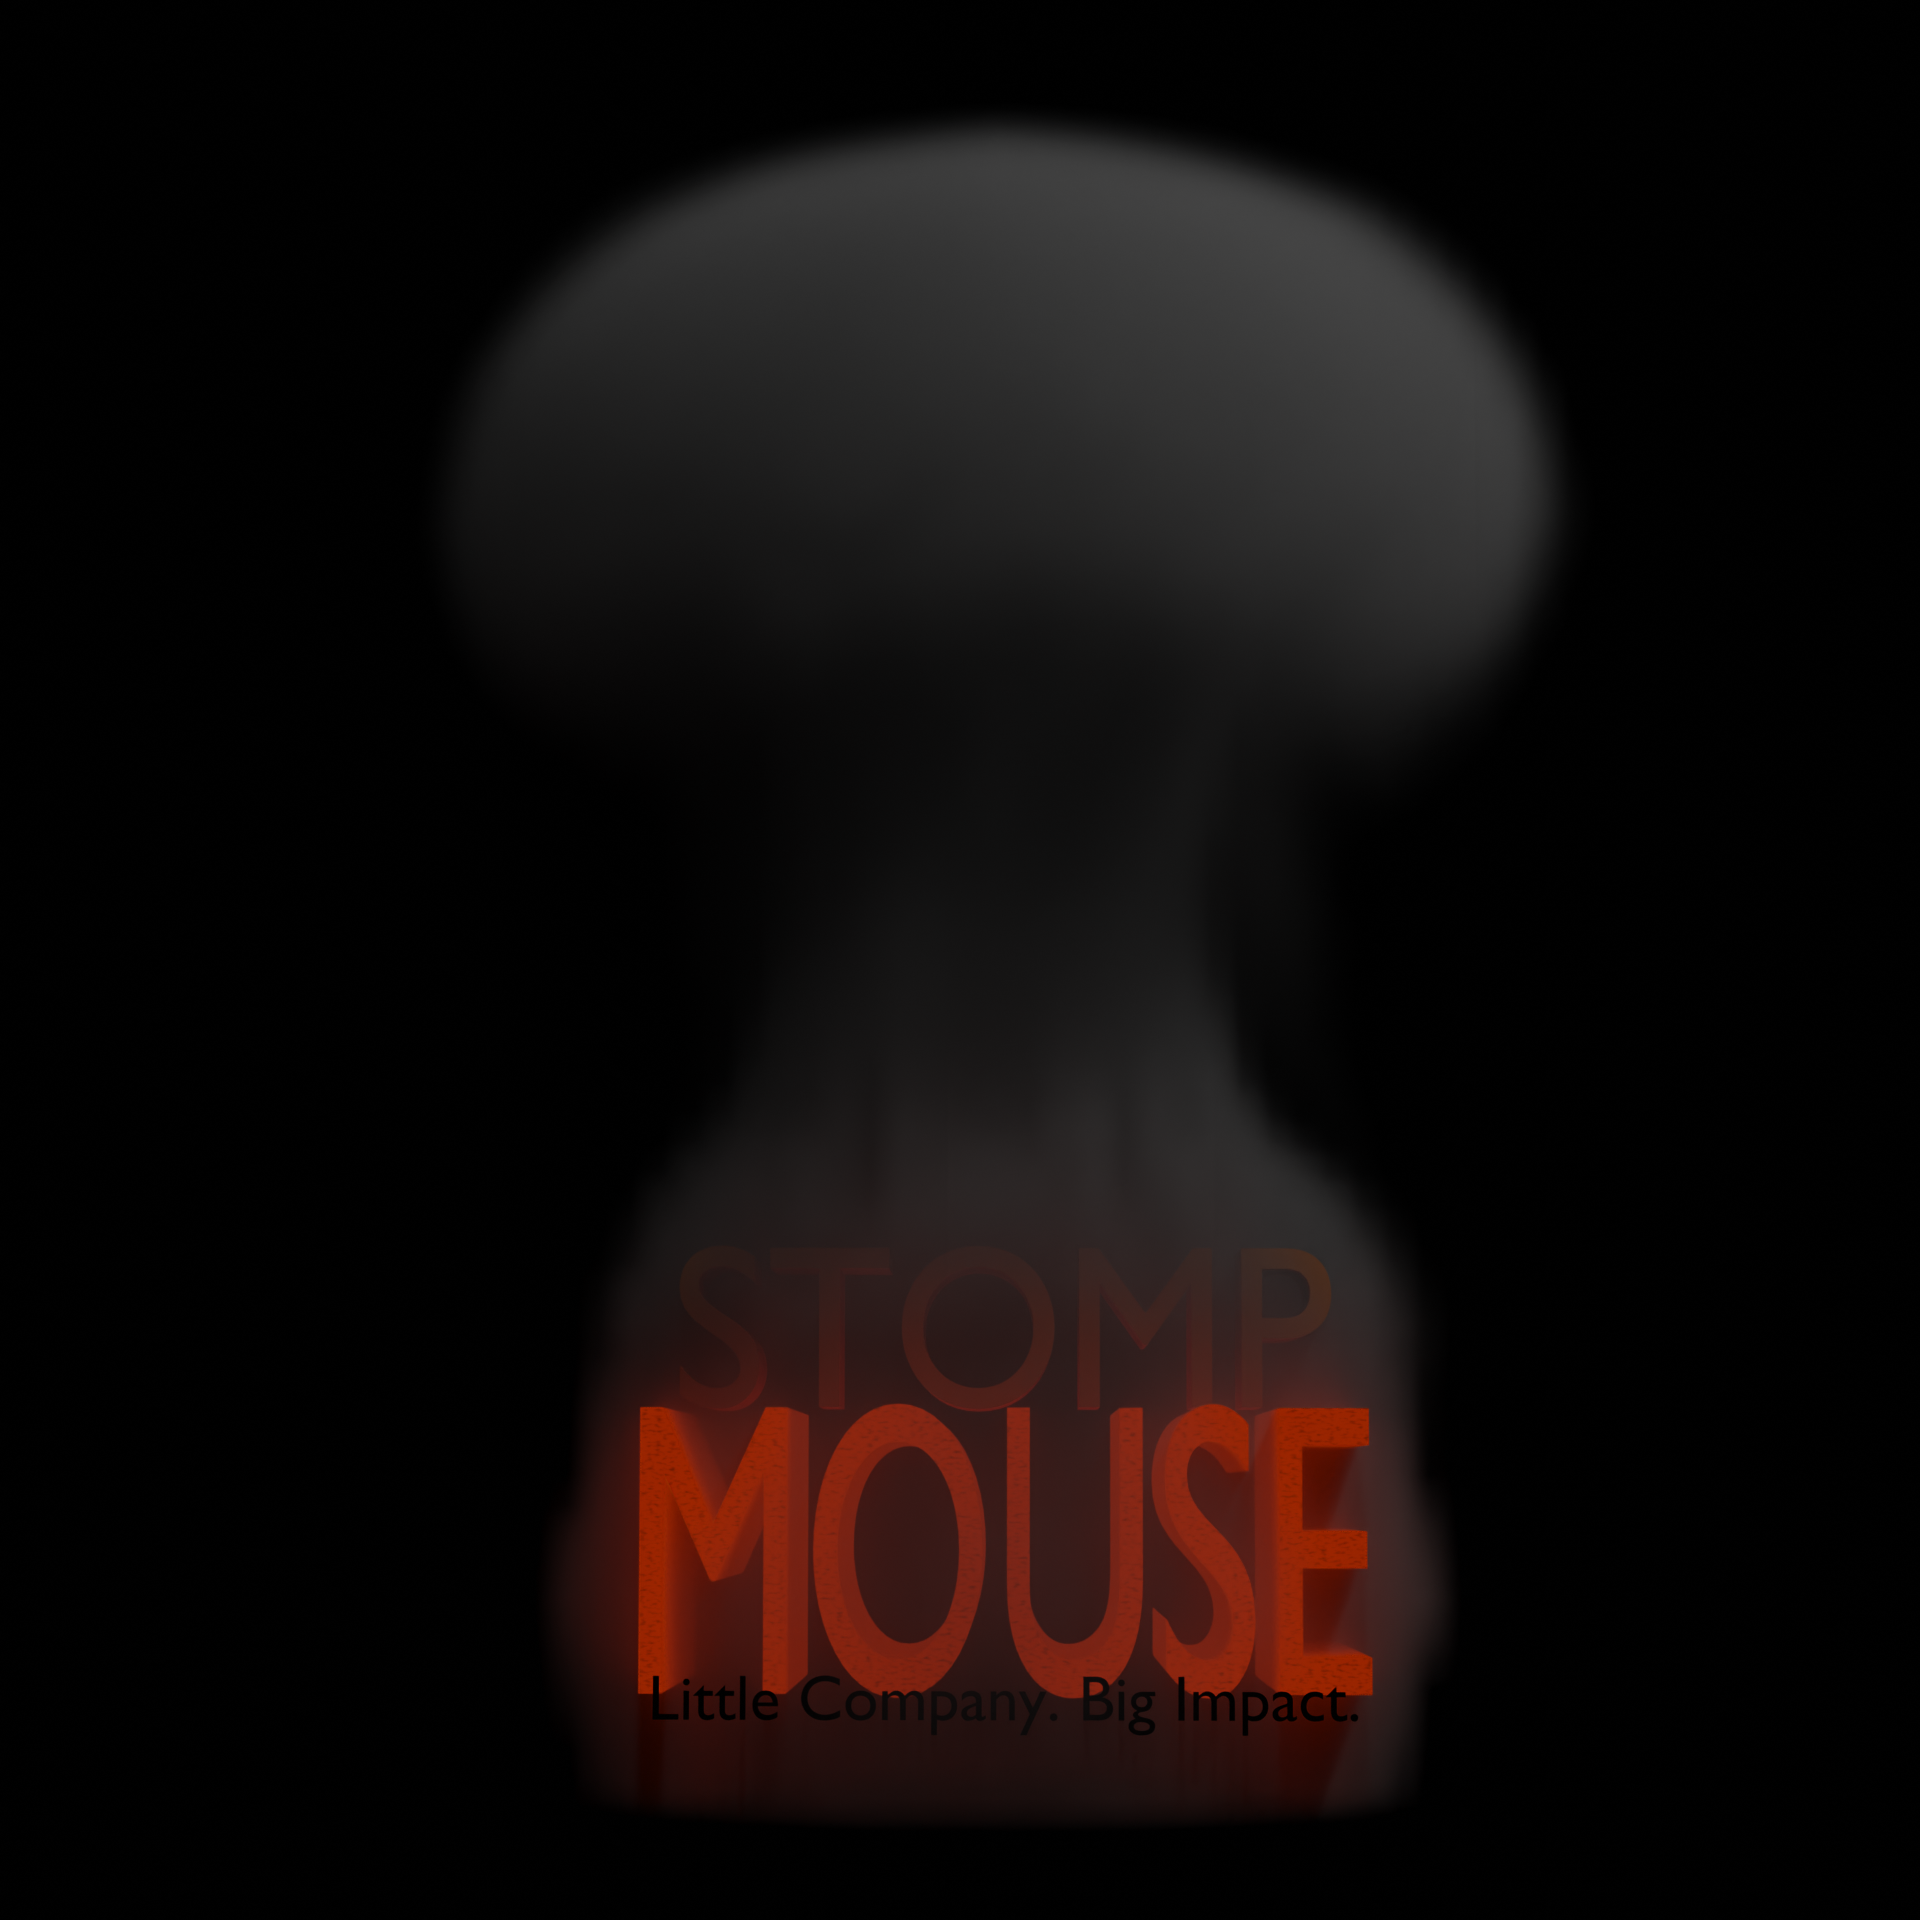 Stomp Mouse